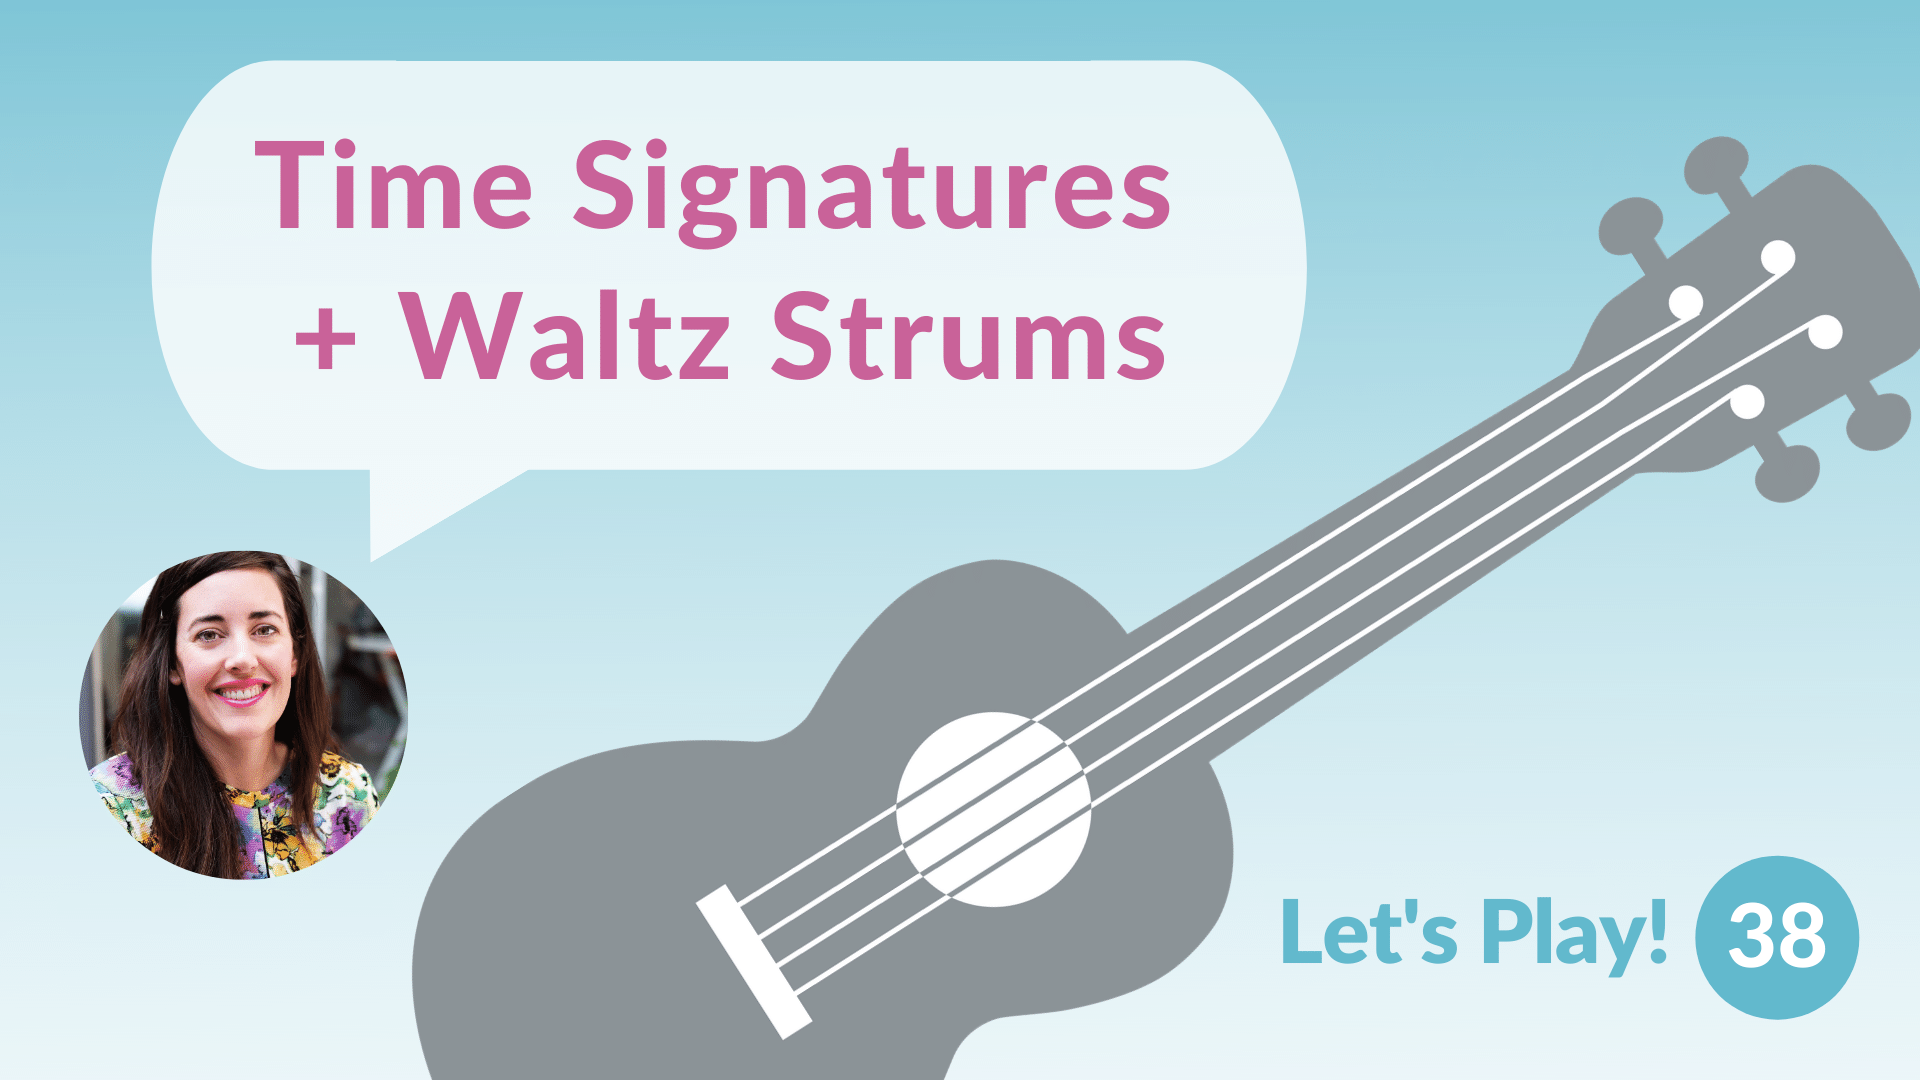 Time Signatures and Waltz Strums